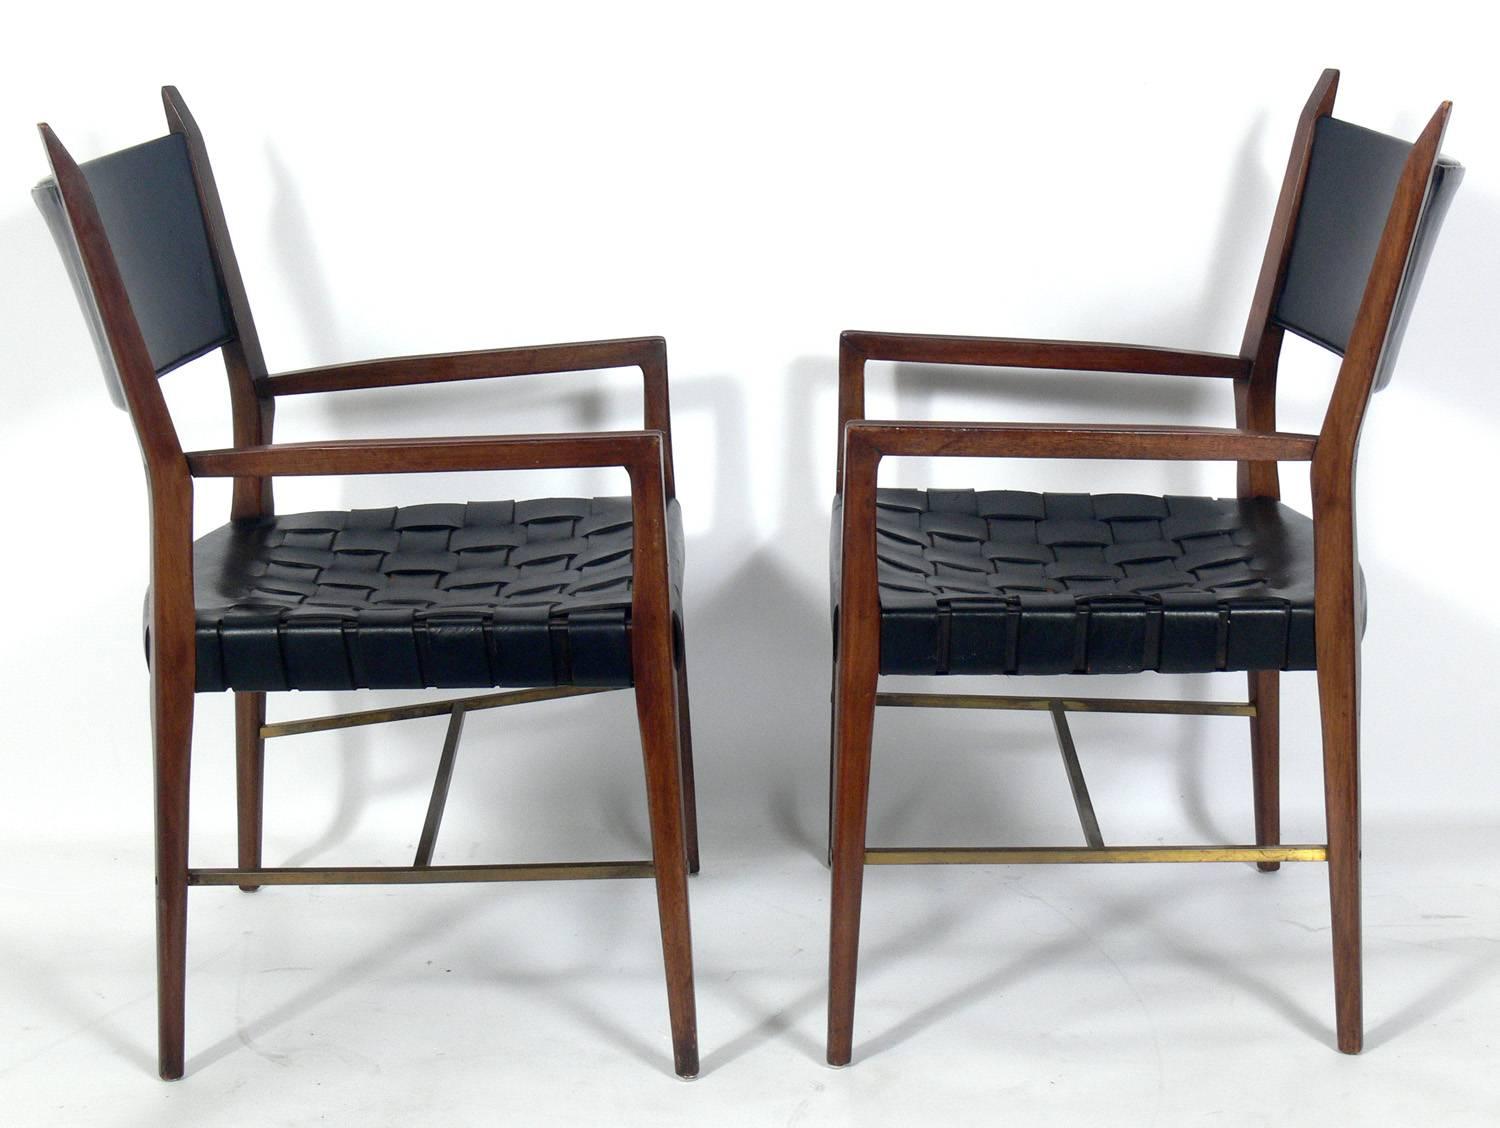 Set of four black leather, walnut, and brass dining chairs, designed by Paul McCobb, American, circa 1960s. They retain their wonderful original patina.